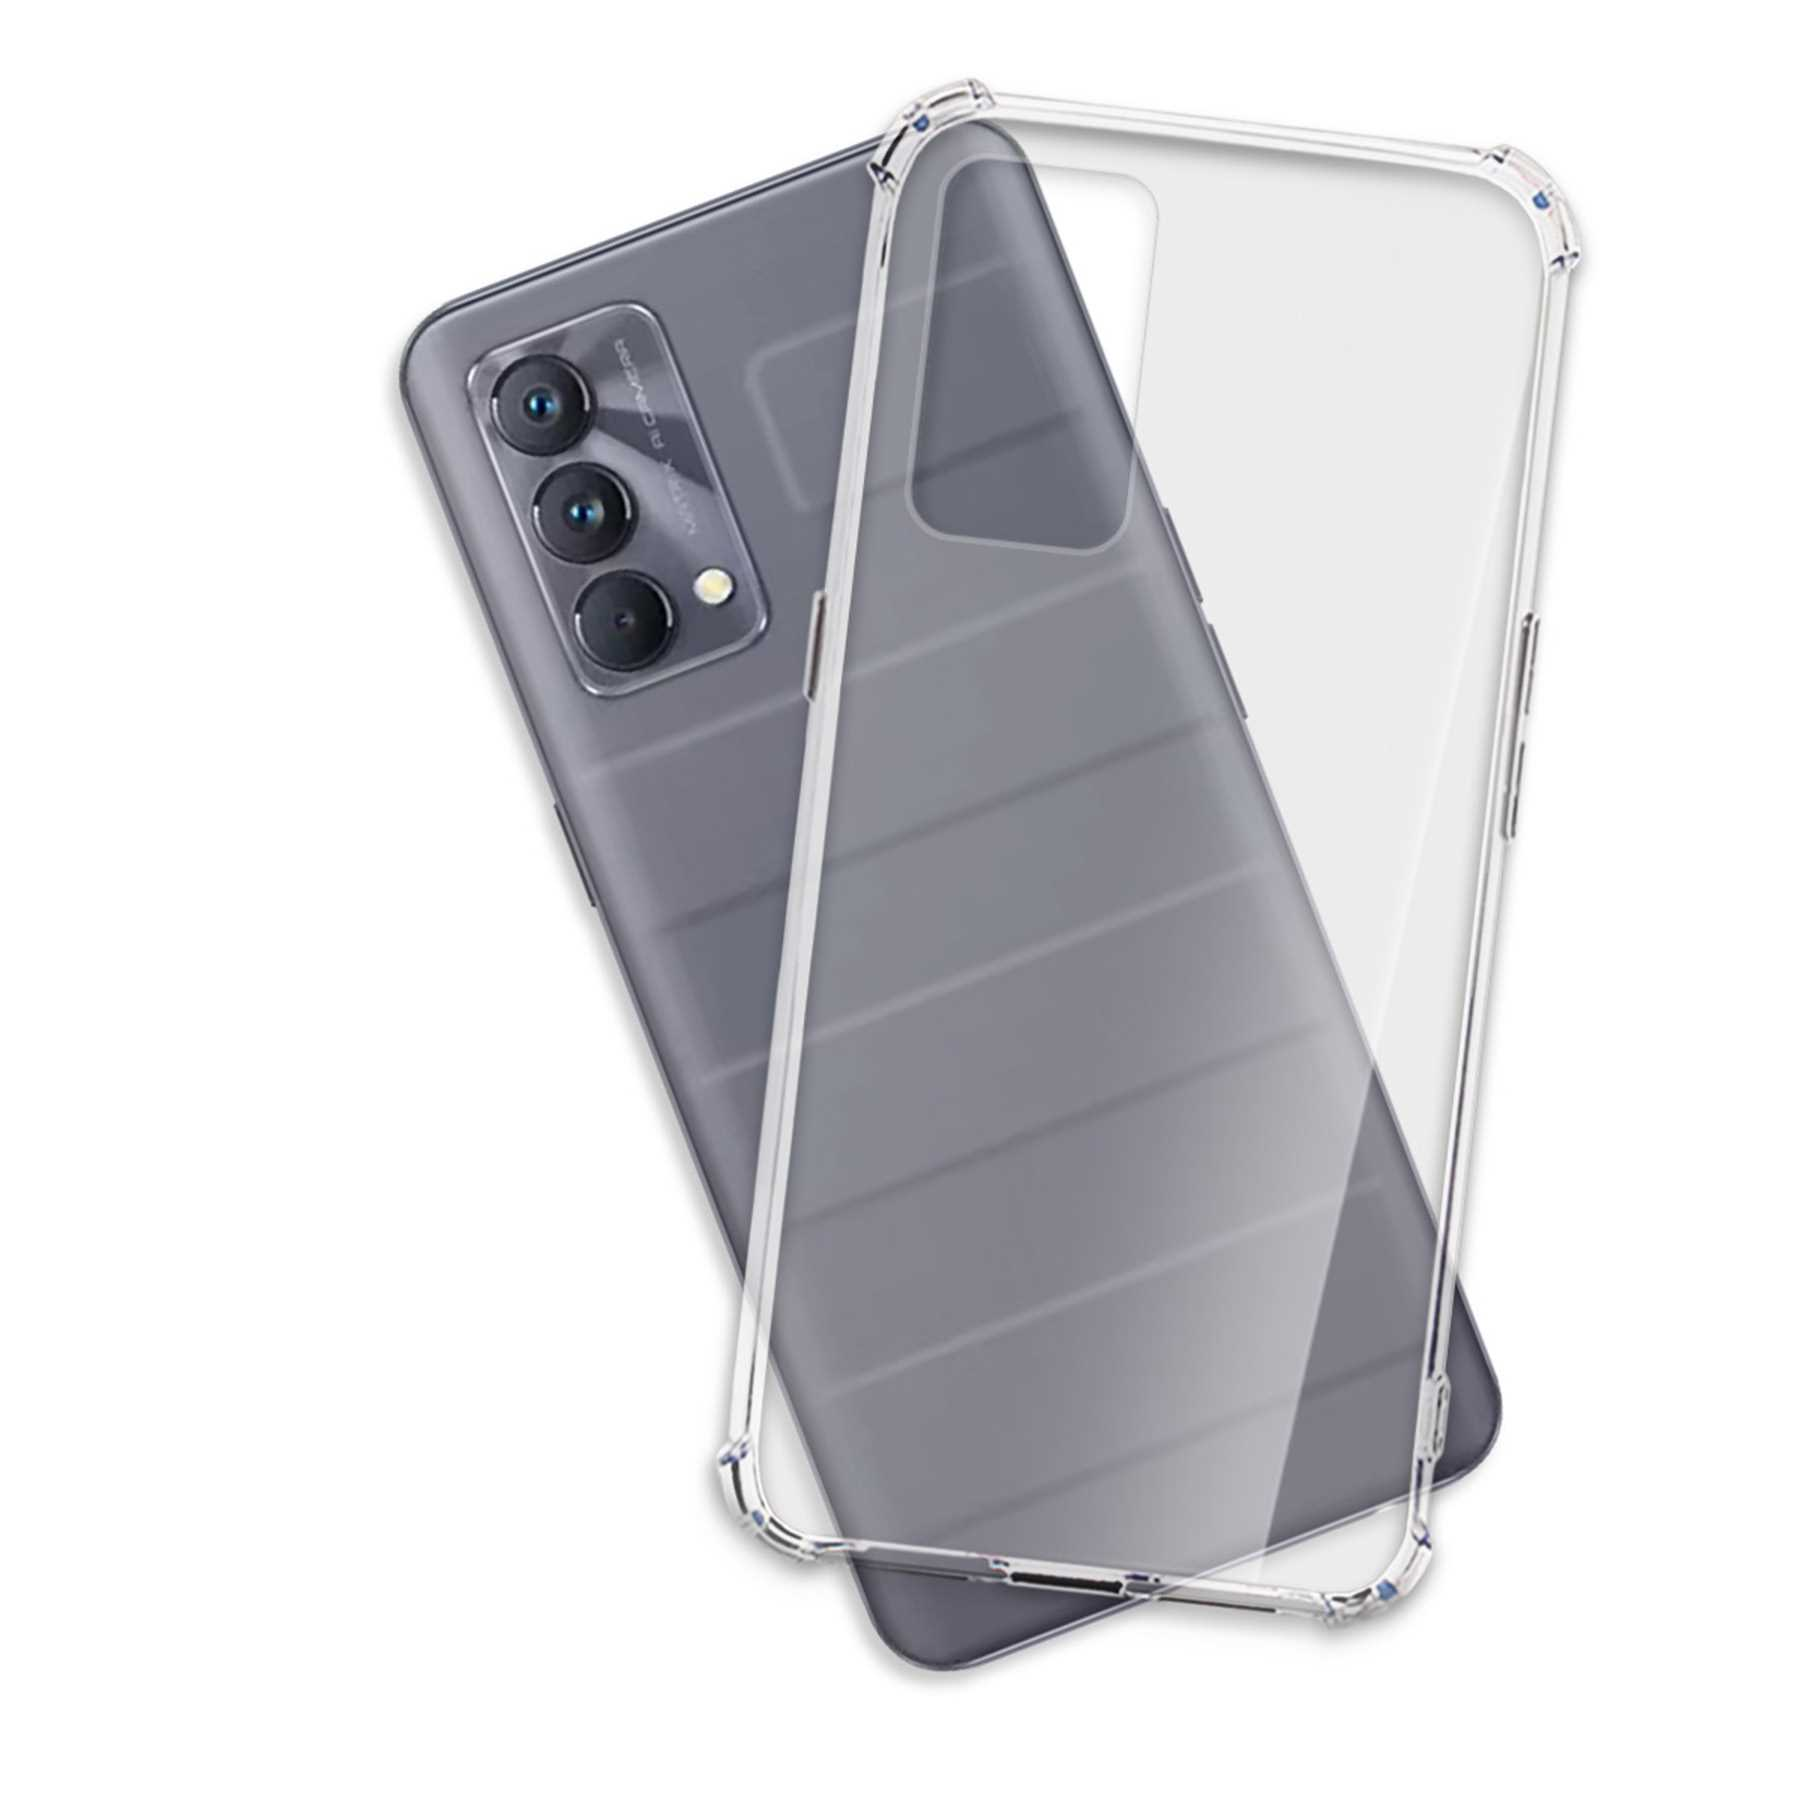 Master Case, 5G, MORE Backcover, ENERGY Realme, Clear Transparent MTB Edition GT Armor